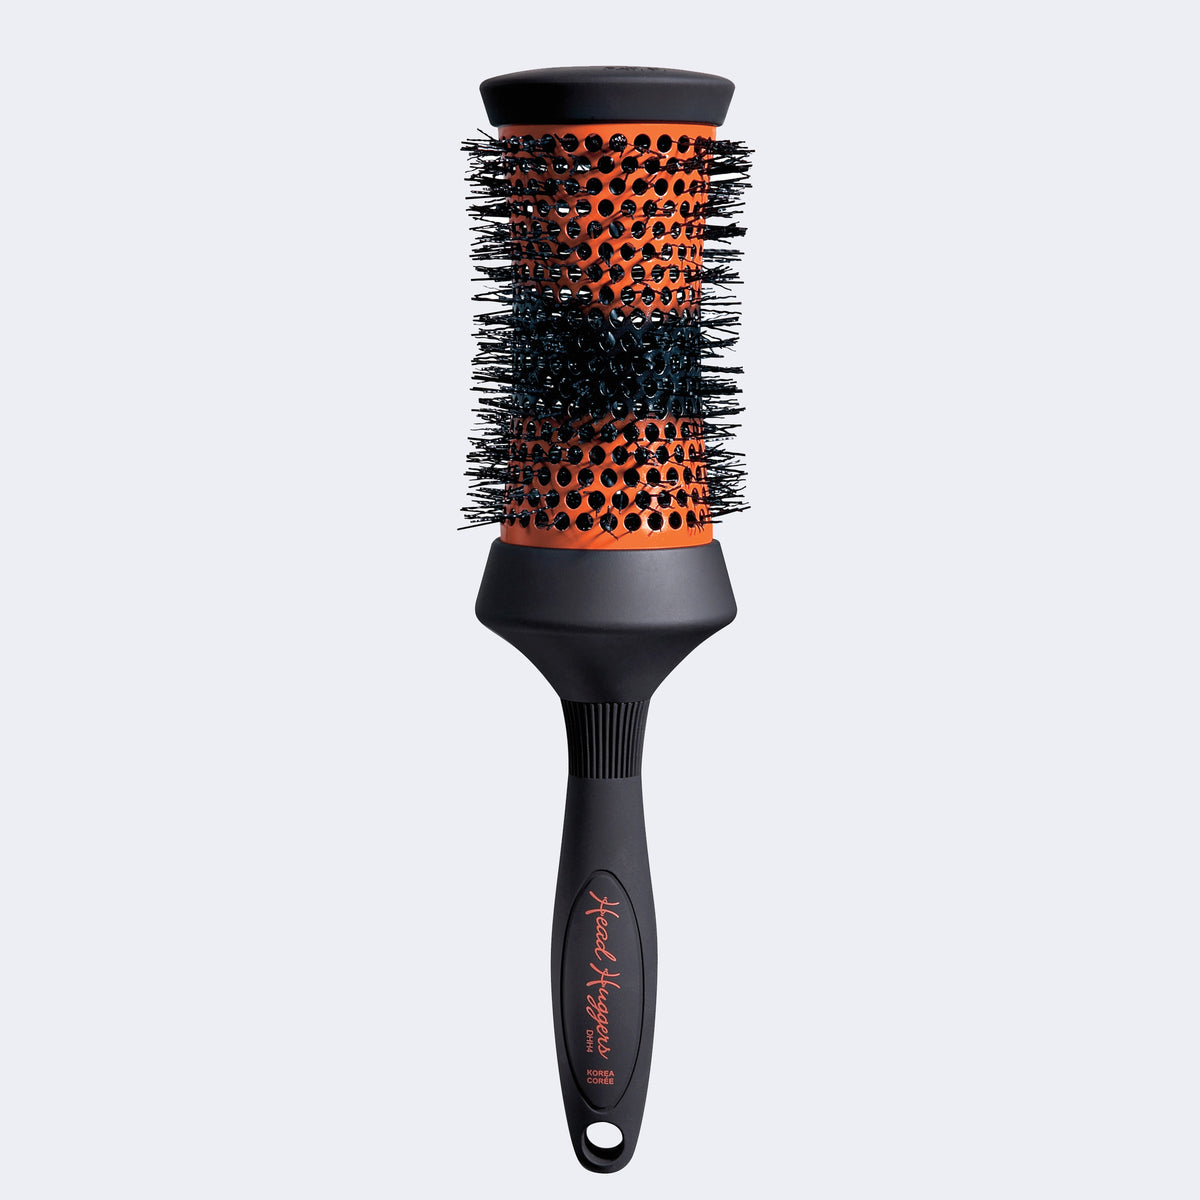 DENMAN® EXTRA-LARGE “HEAD HUGGERS” CERAMIC THERMAL BRUSHES